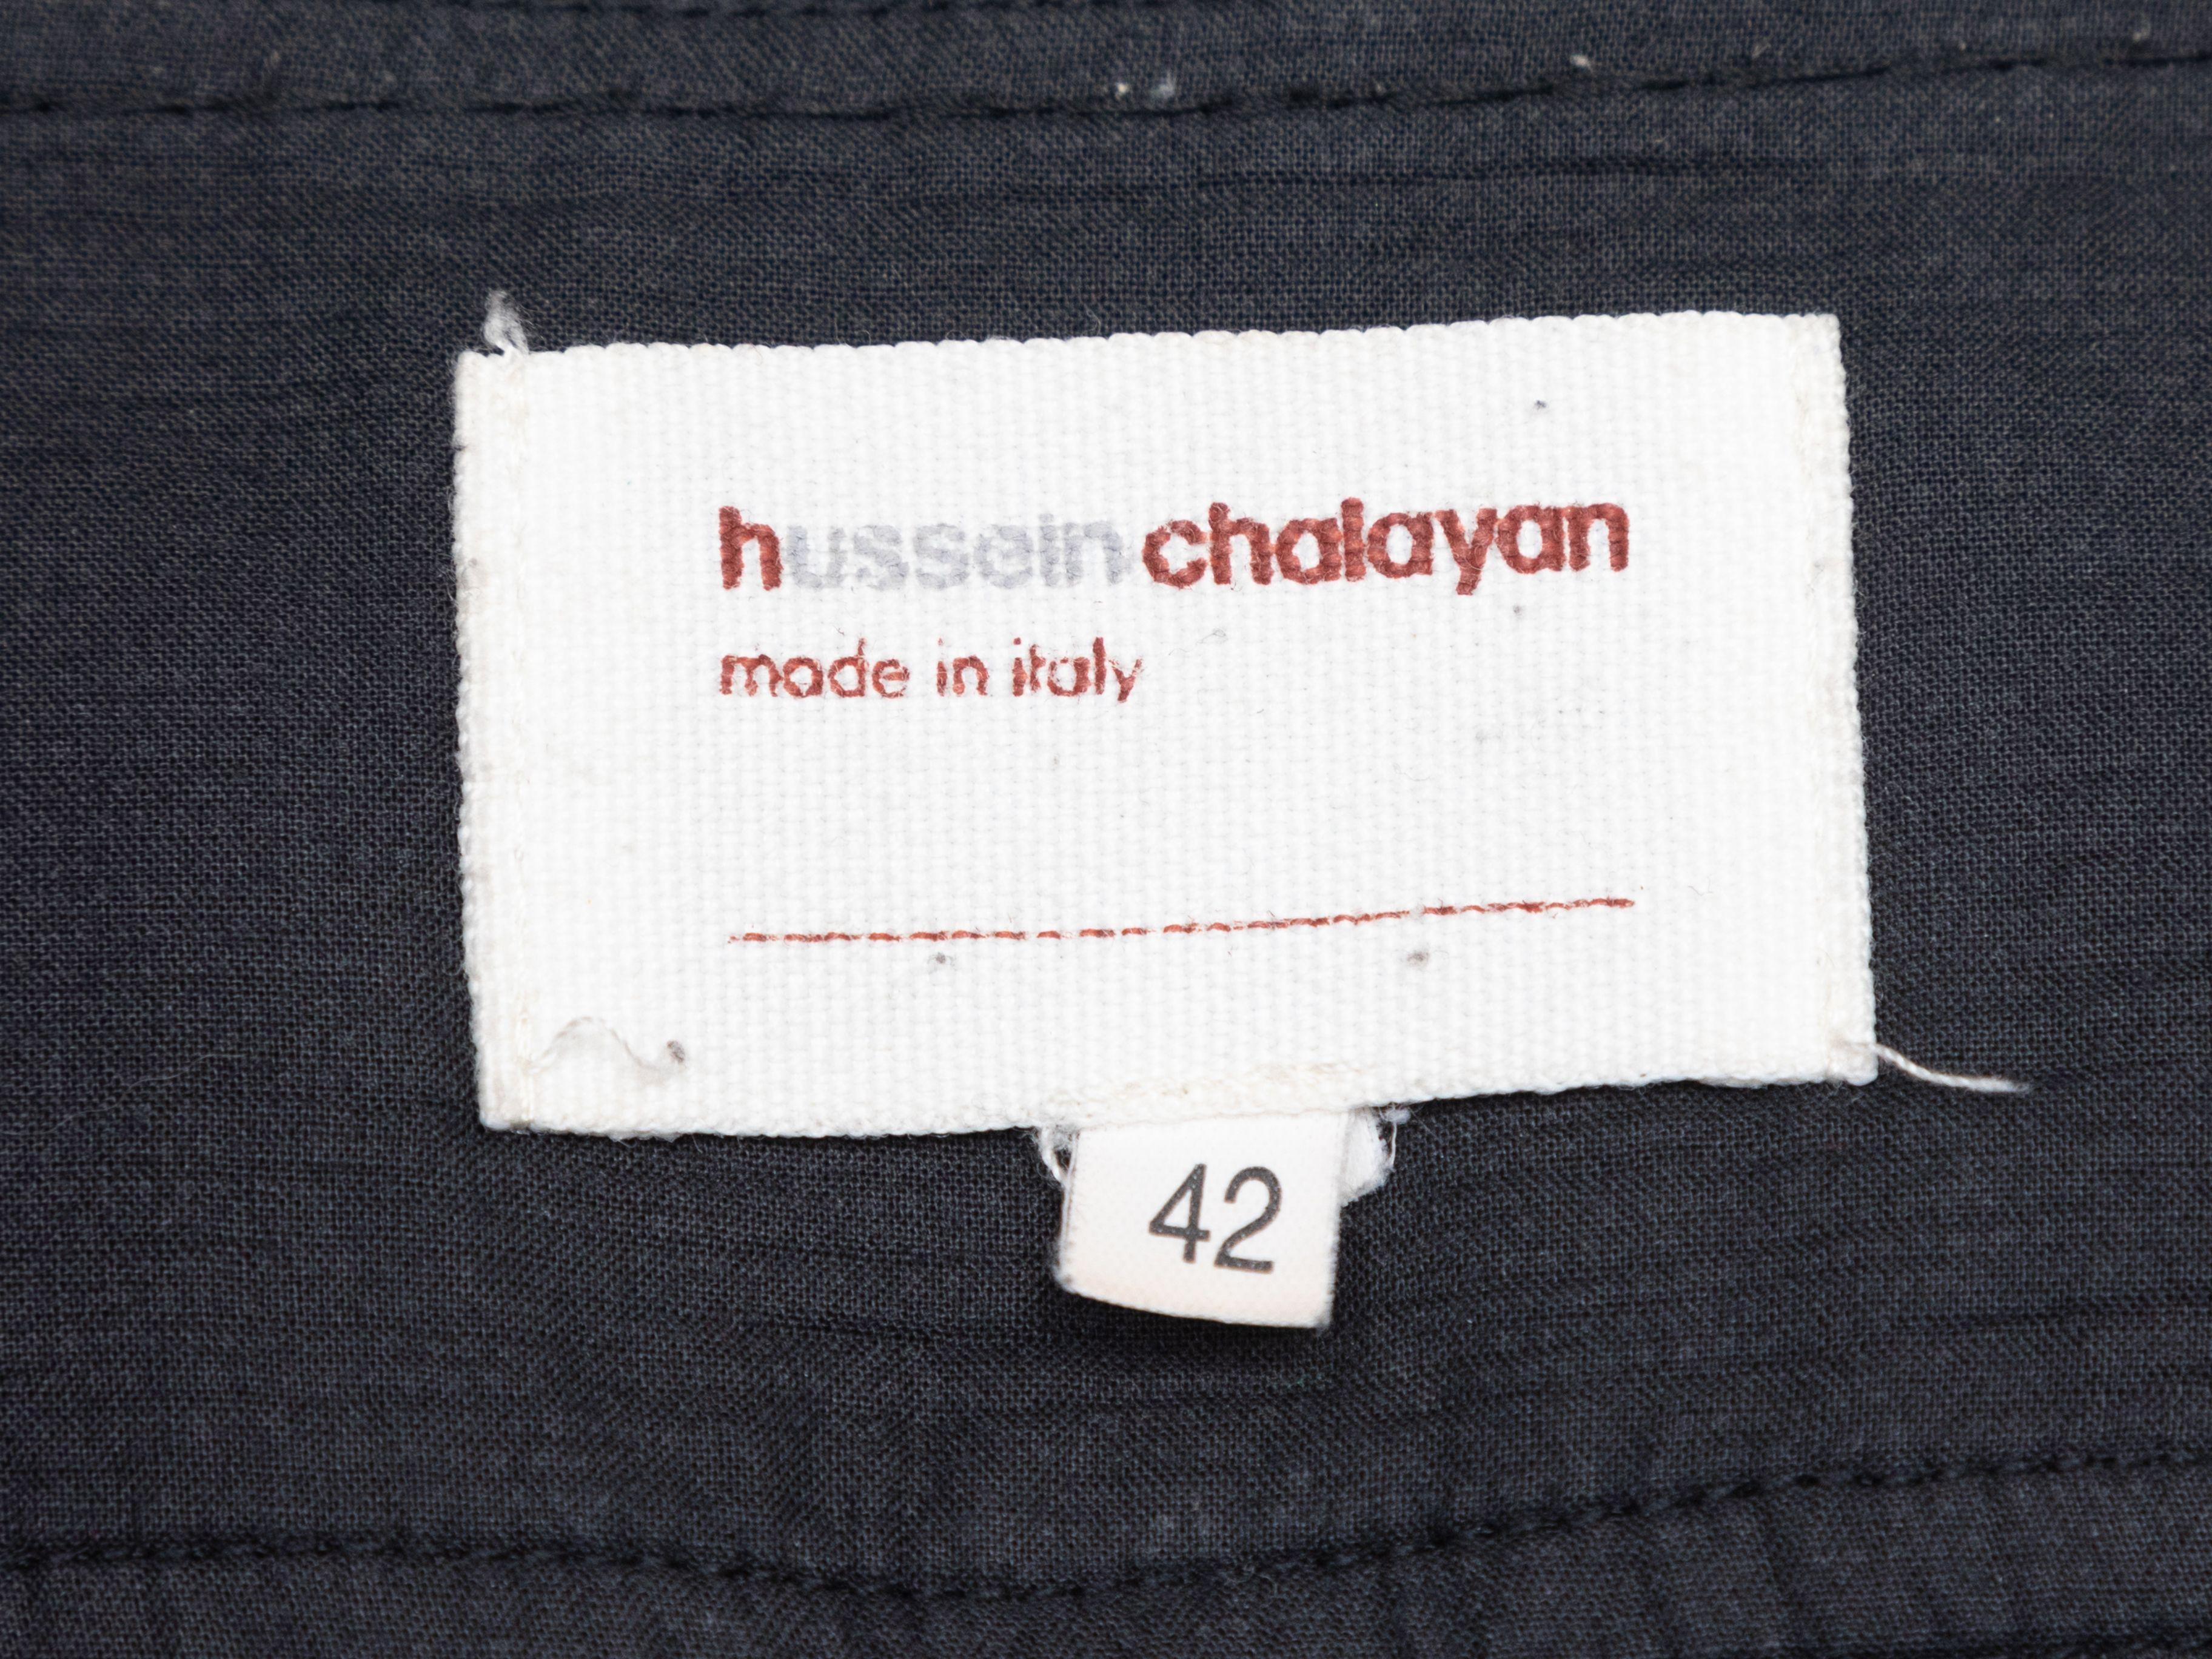 Product Details: Black pleated Bermuda shorts by Hussein Chalayan. Three pockets. Zip closure at front. Designer size 42. 33